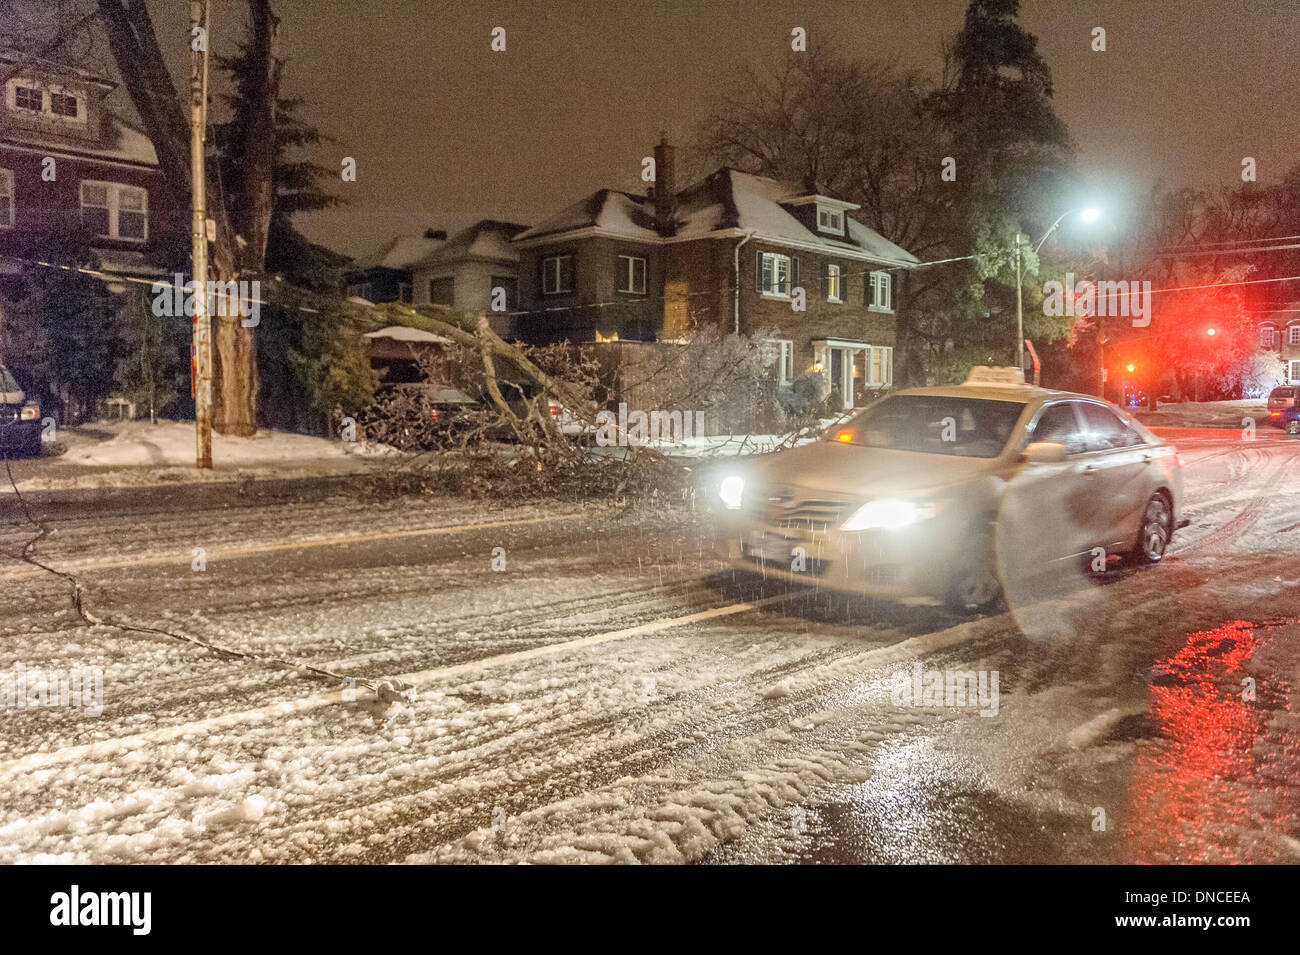 Toronto, Canada. 22nd Dec, 2013. A taxi navigates around fallen trees and power lines on Mt. Pleasant Rd. Freezing rain clung to every surface across the Greater Toronto Area, felling trees and power lines. Credit:  Victor Biro/Alamy Live News Stock Photo